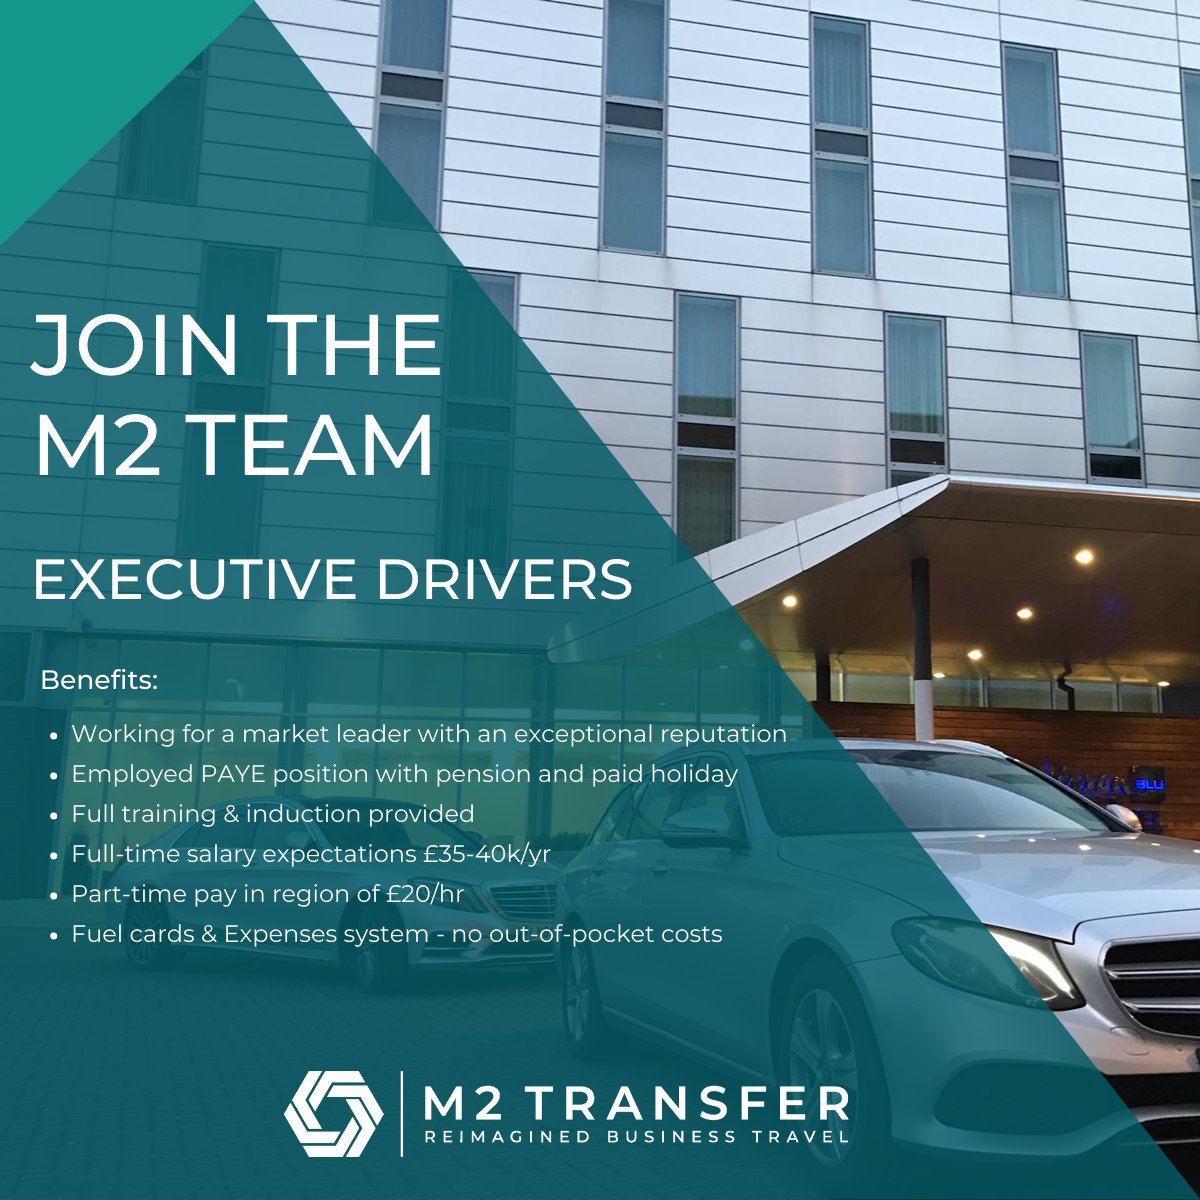 Looking for a new opportunity as part of a great team? We are looking for Executive Drivers who are passionate about delivering excellent service. If you're looking for a career change with flexible hours to suit you, then apply ▶️ ow.ly/e4PY50NgLAP #jobs #shepshed